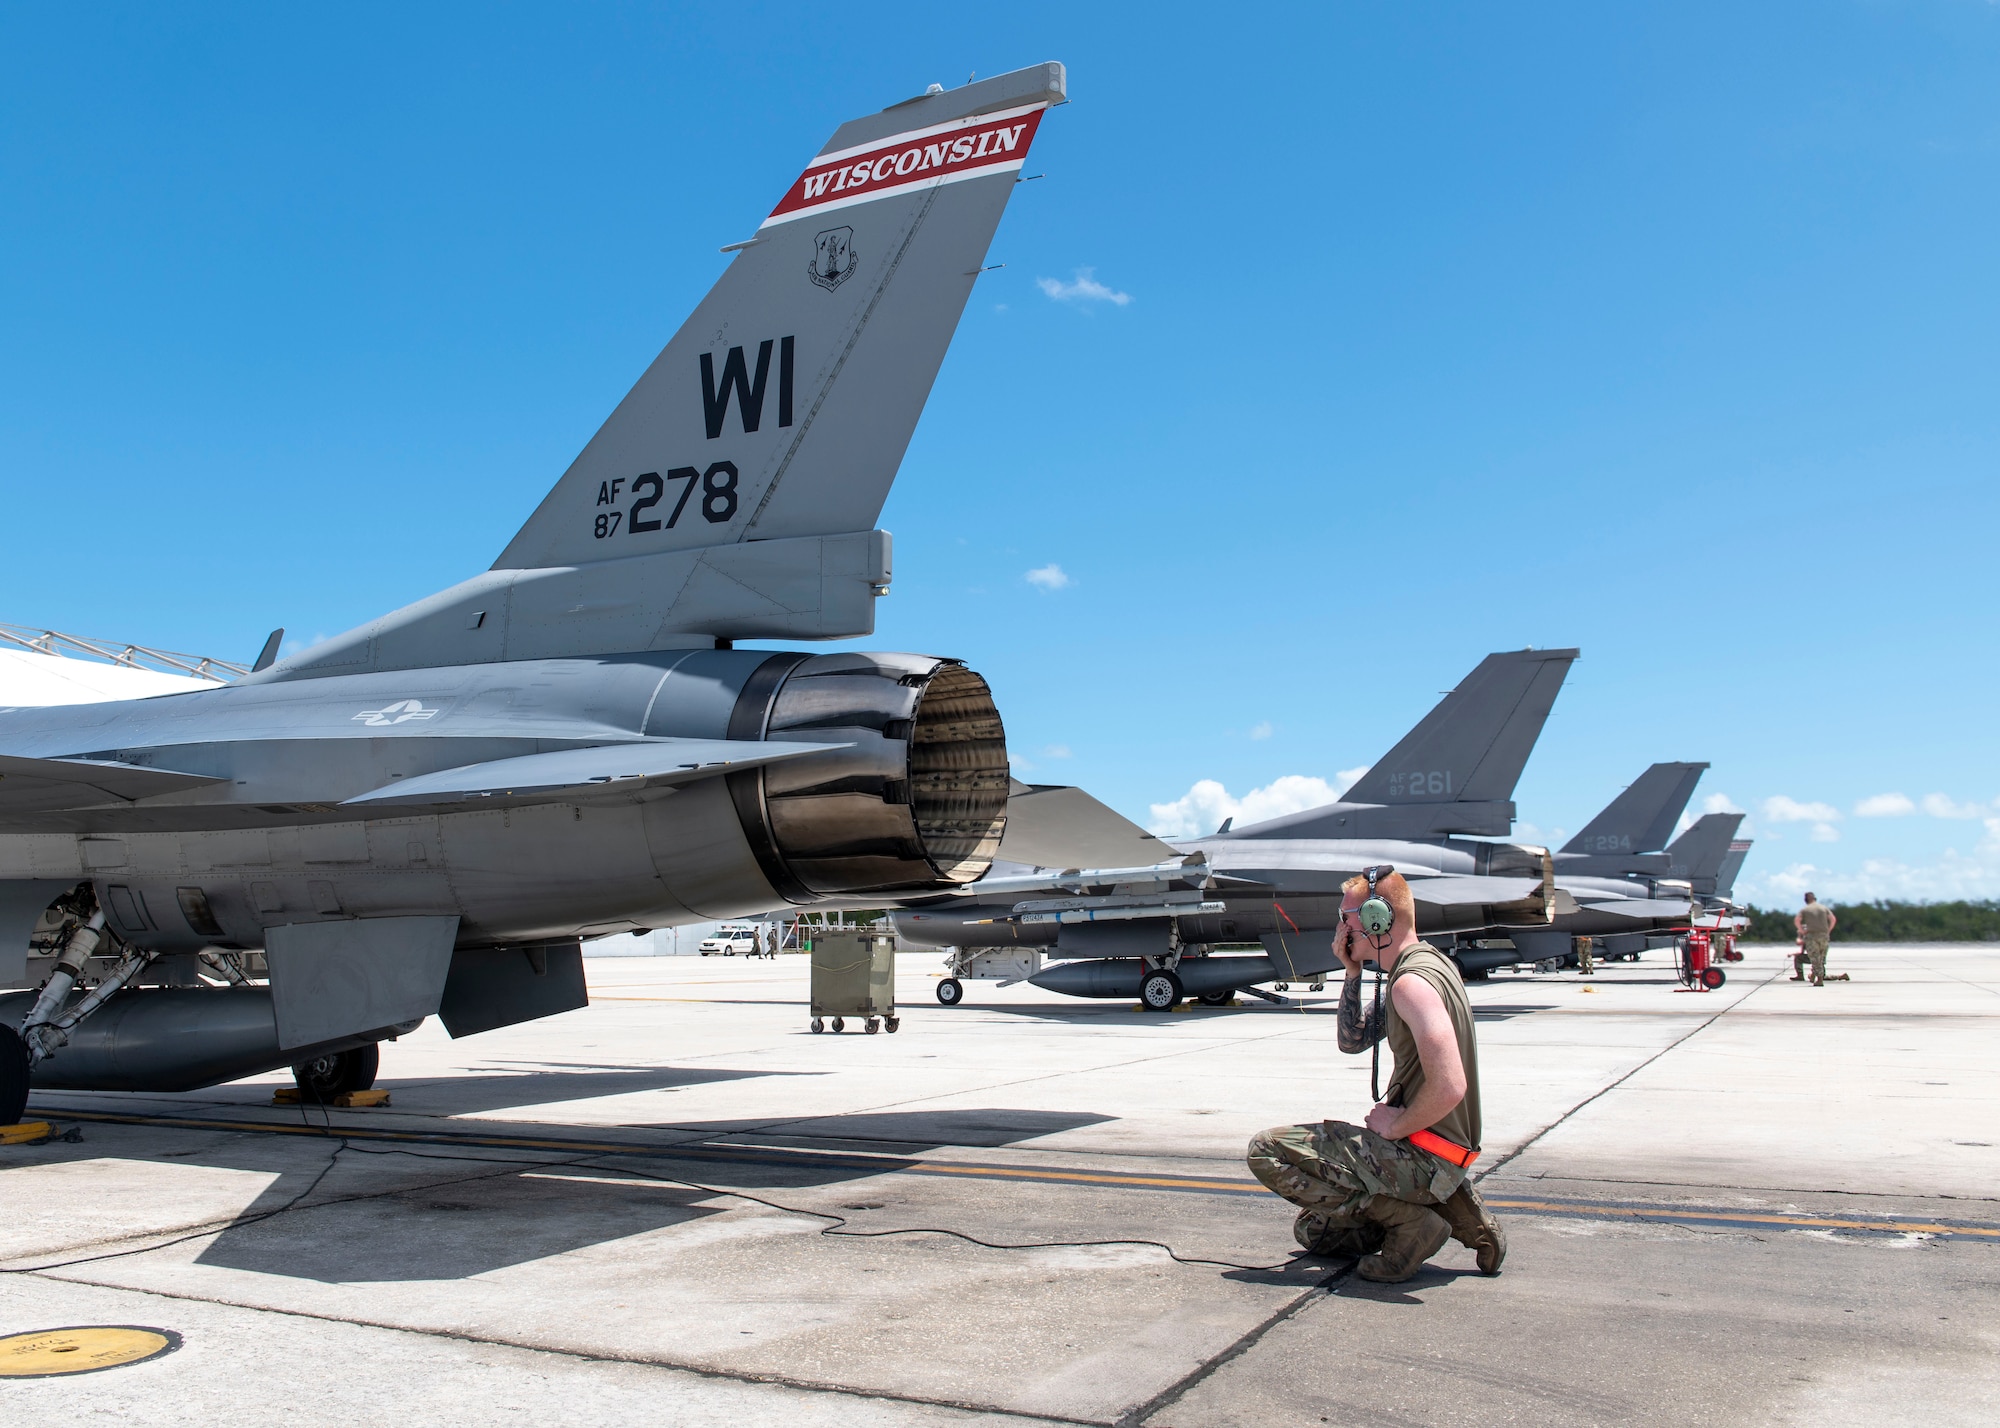 A tactical aircraft maintenance specialist with the U.S. Air Force prepares an F-16 Fighting Falcon aircraft for takeoff.